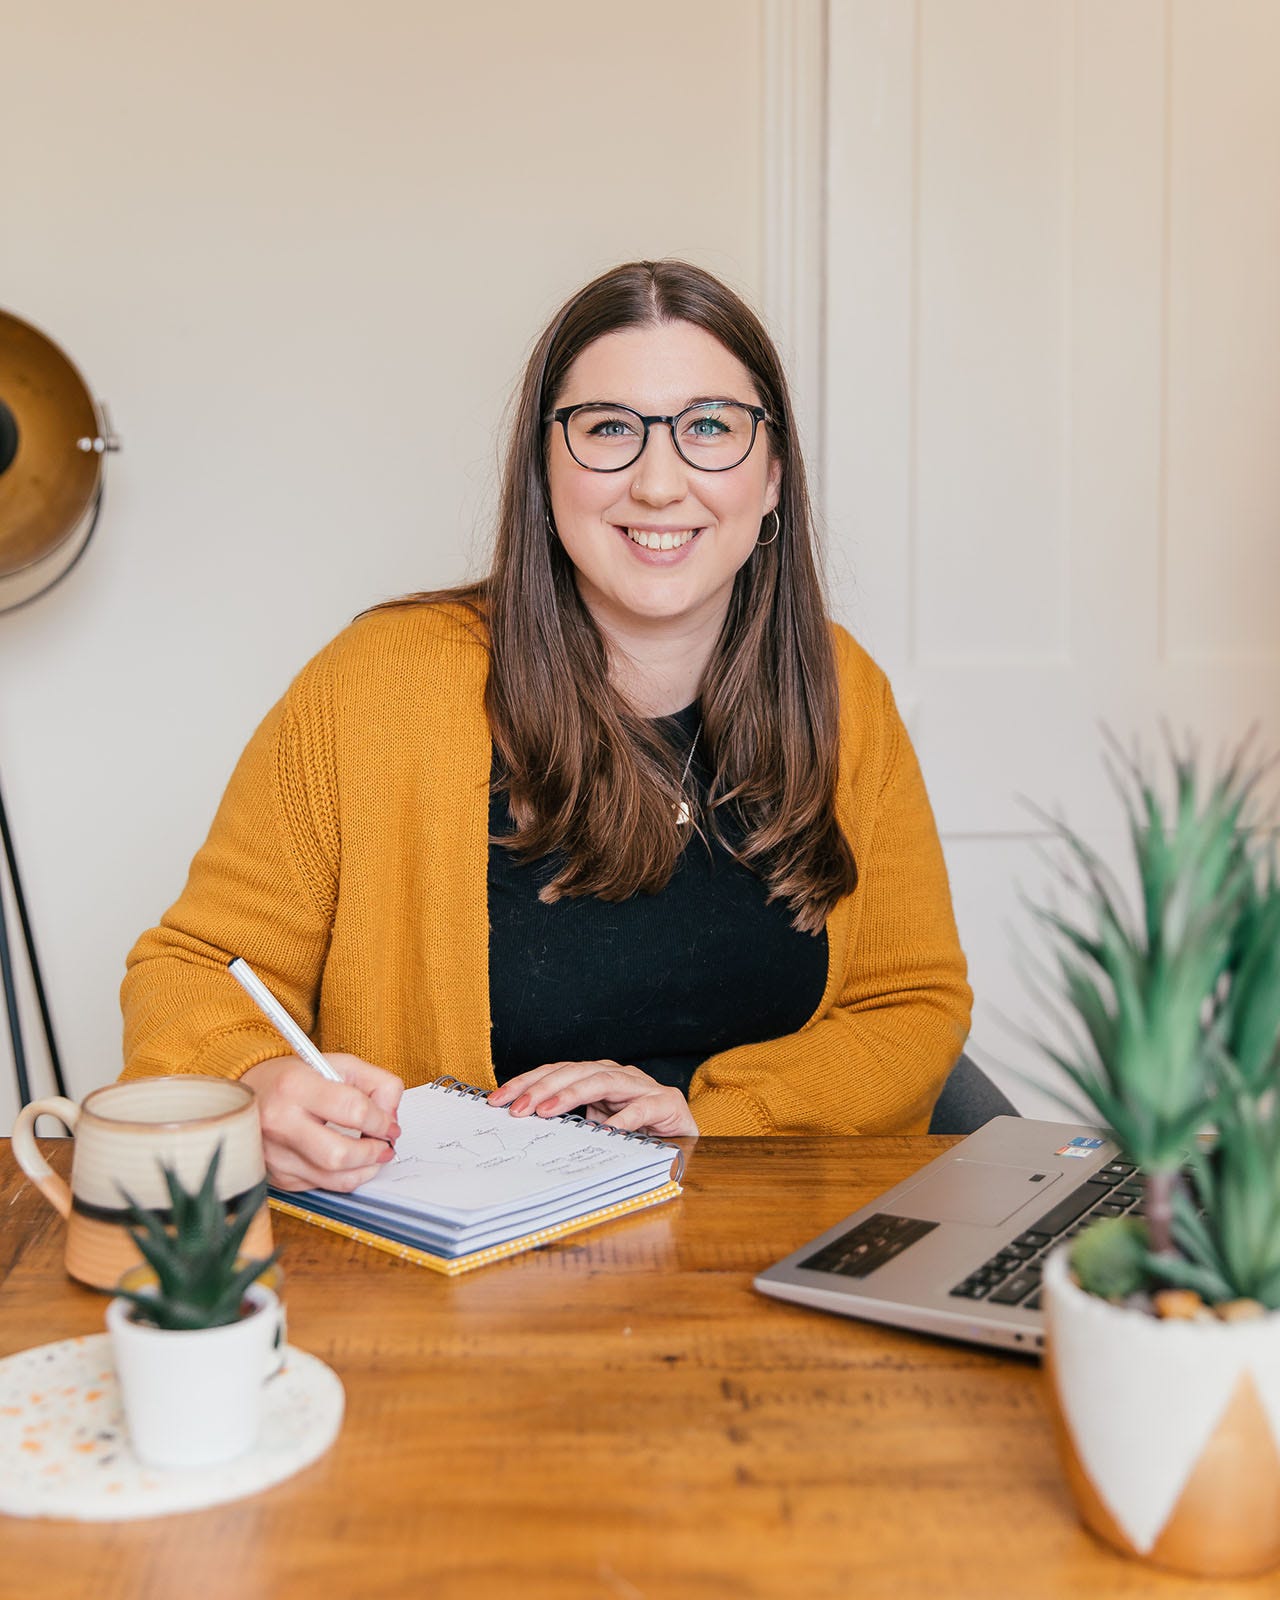 Rachel Baker, freelance copywriter and founder of The Ethical Copywriter, sits at her desk and maps out a content strategy in her notebook. On her desk is a laptop, plants, candle and a mug. She wears an orange cardigan, is gazing straight ahead at the camera and is smiling.